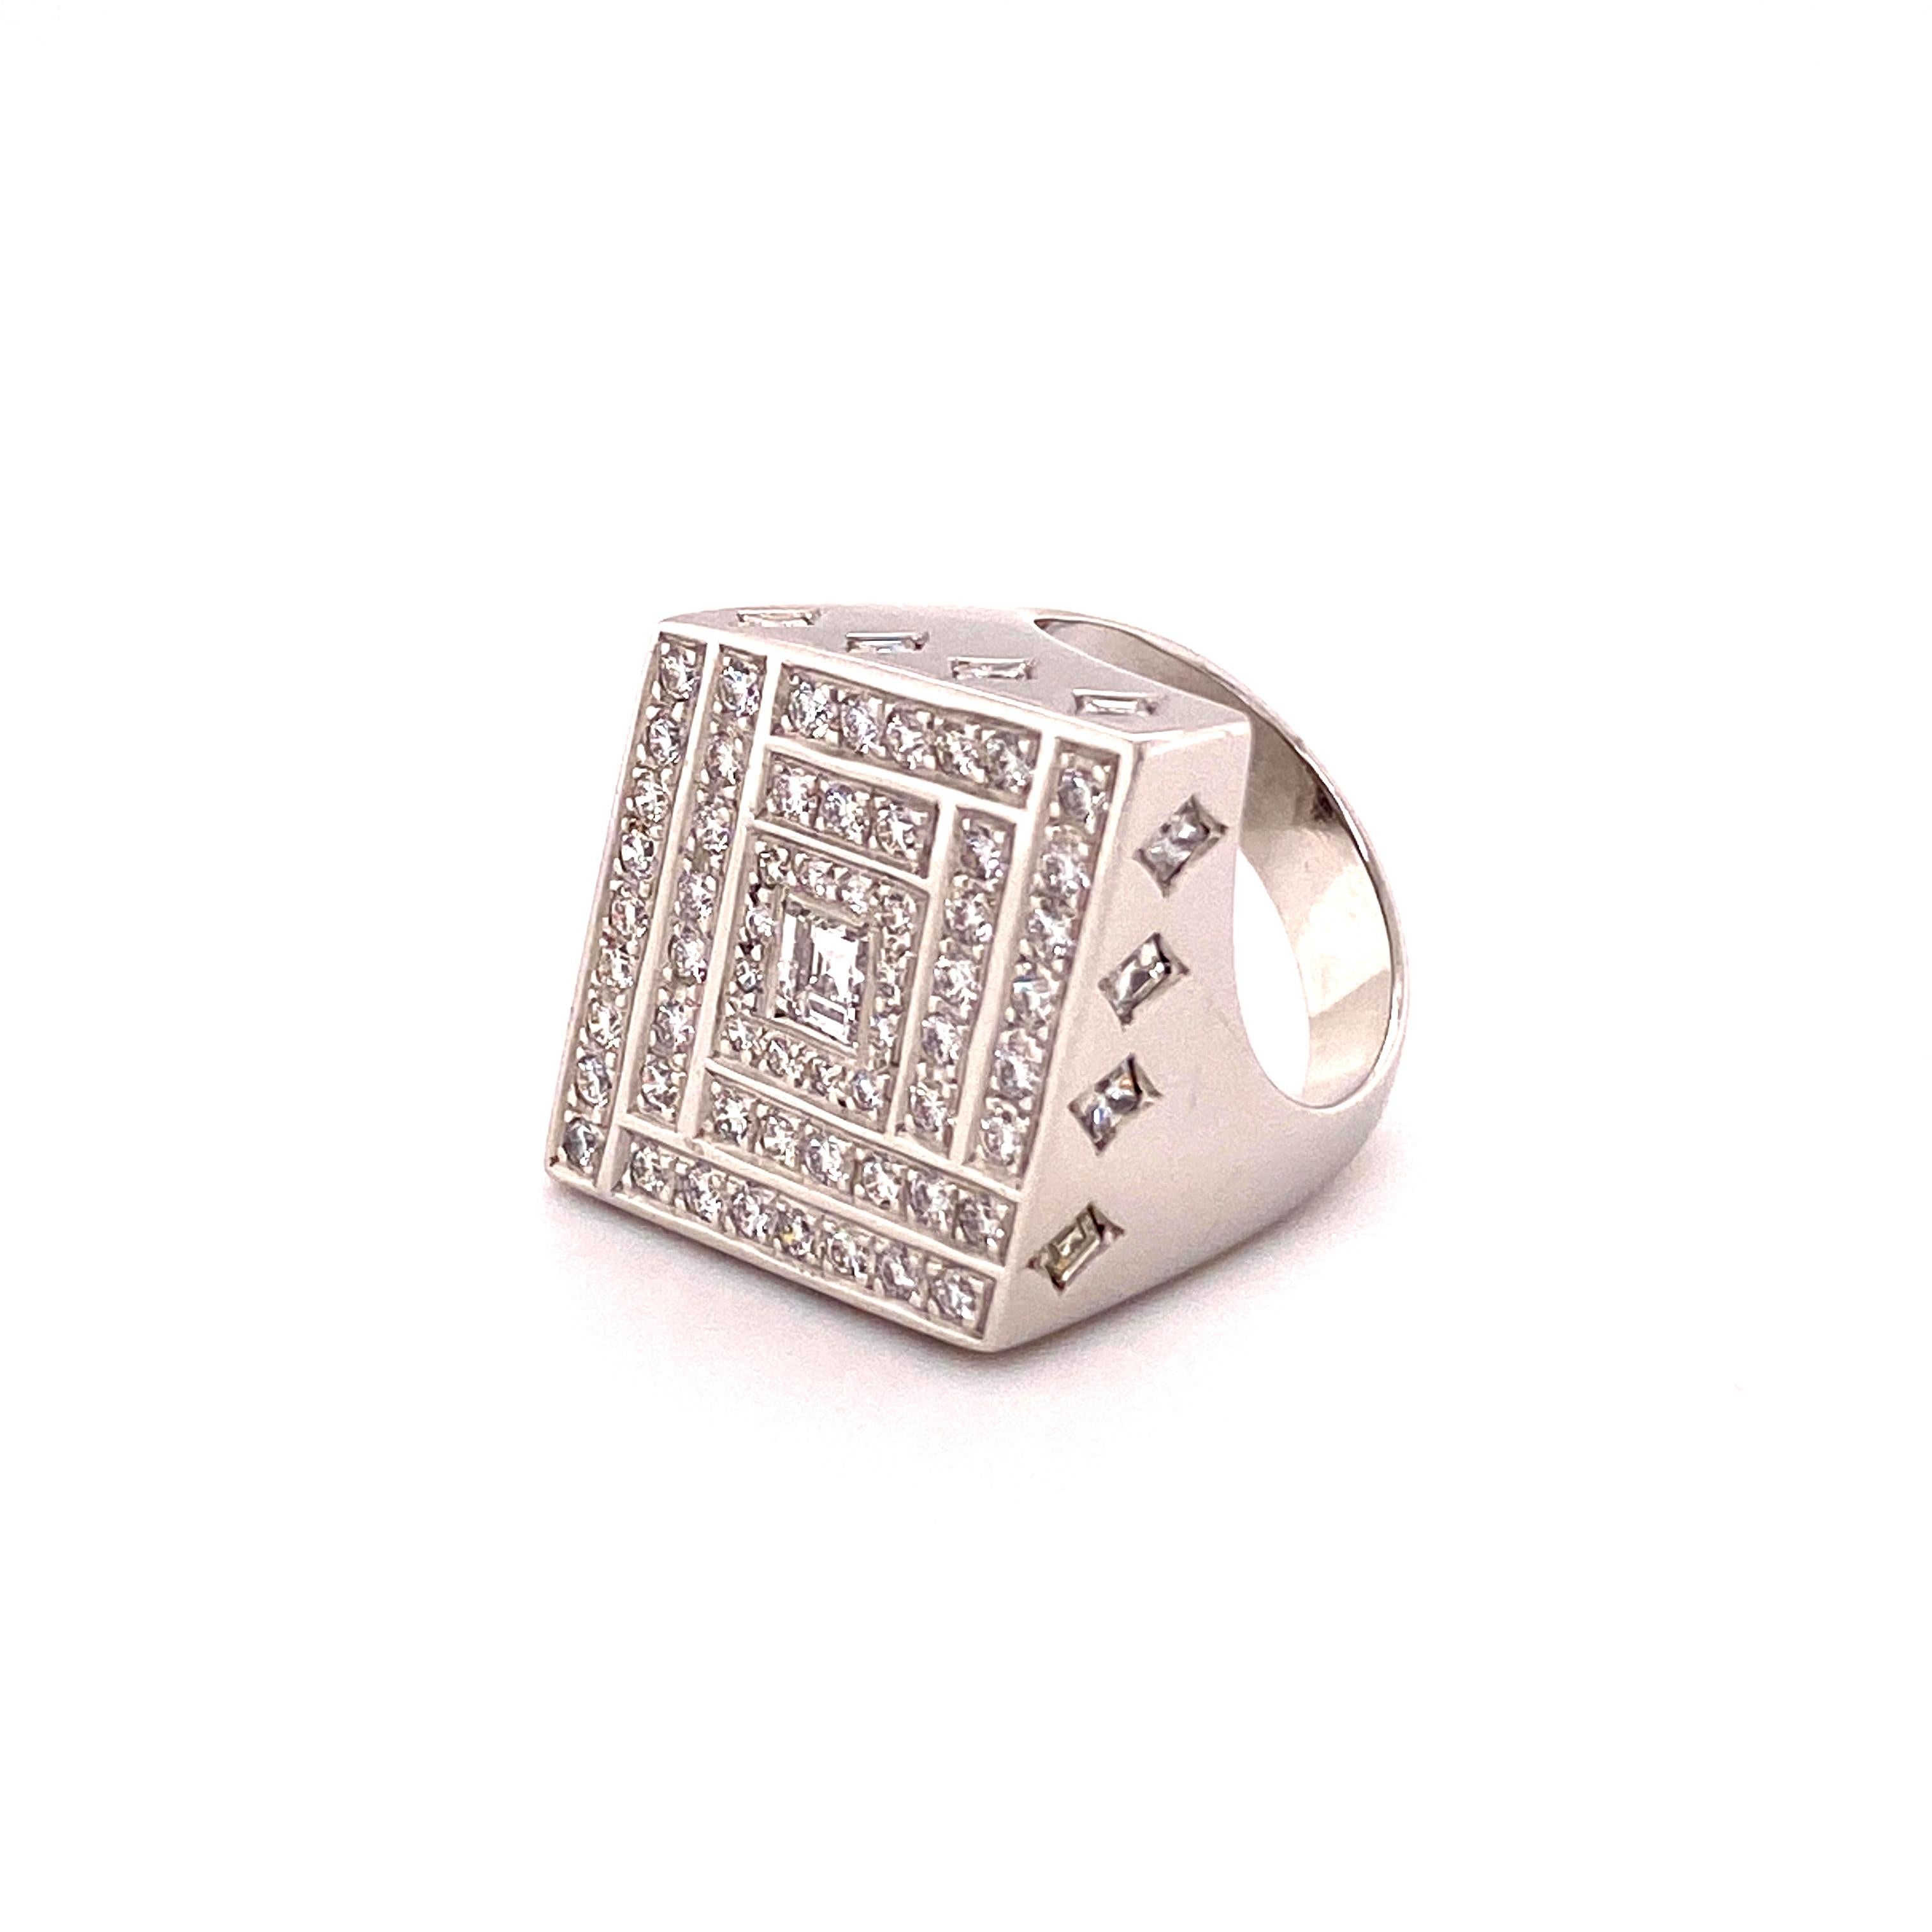 This ring captivates by its clear geometrical design. The slightly thicker white gold bars between the diamonds create a great light effect. 60 pavé-set brilliant-cut diamonds surround a carré cut diamond in the center. At the side, the rhombic